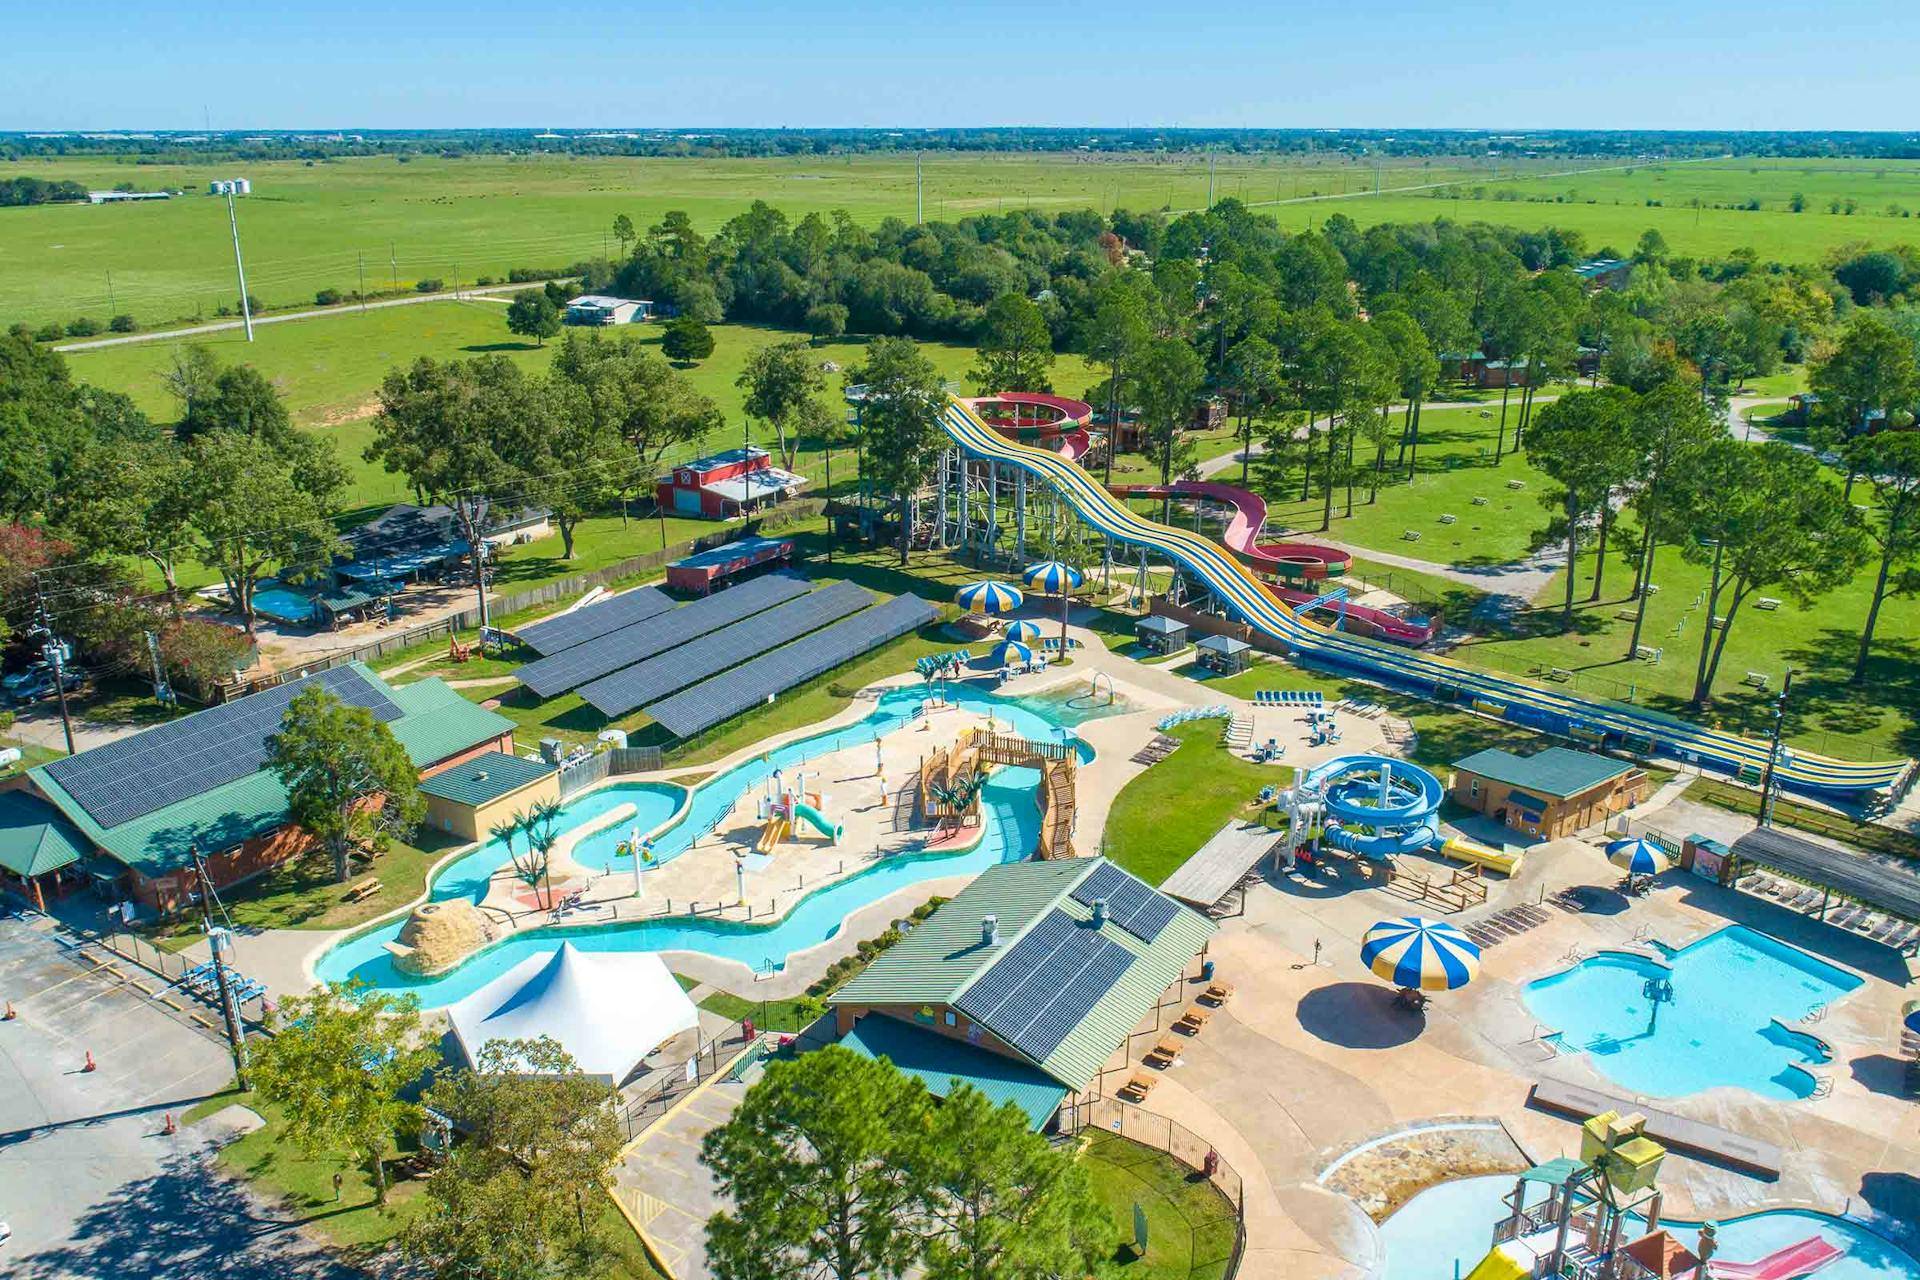 The 11 Best Campgrounds Near Houston for Families